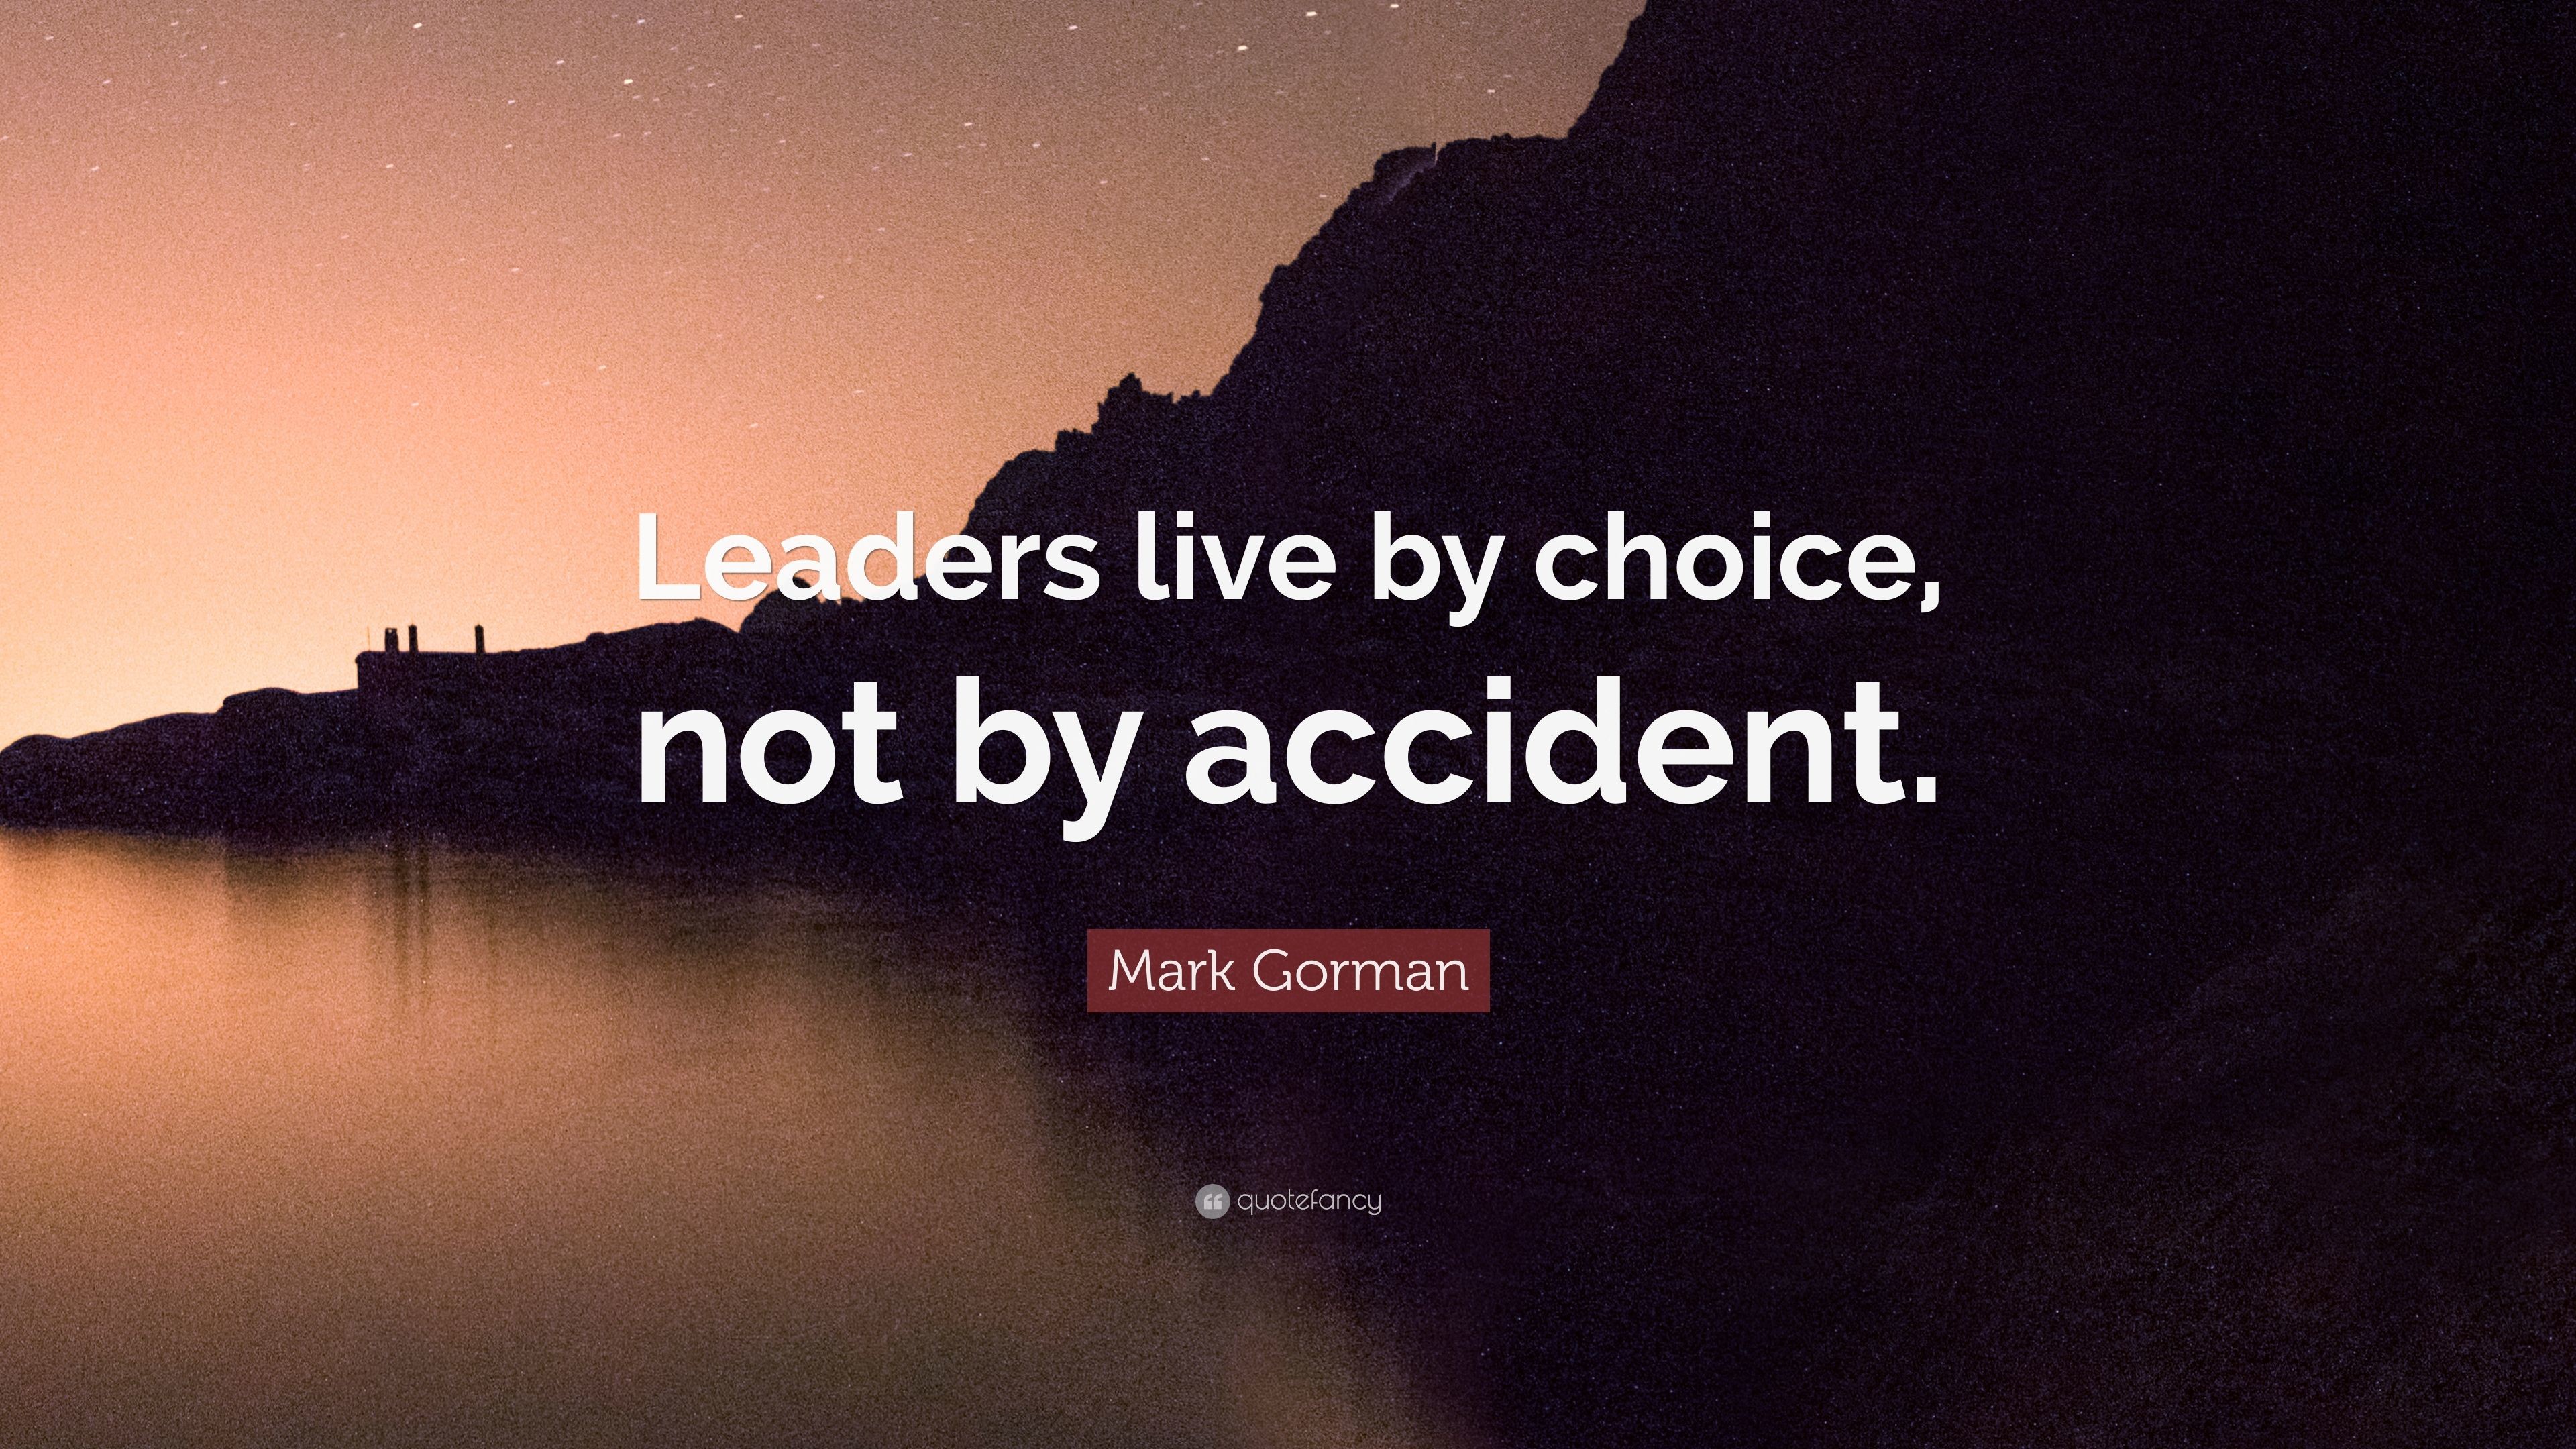 3840x2160 Mark Gorman Quote: “Leaders live by choice, not by accident.”